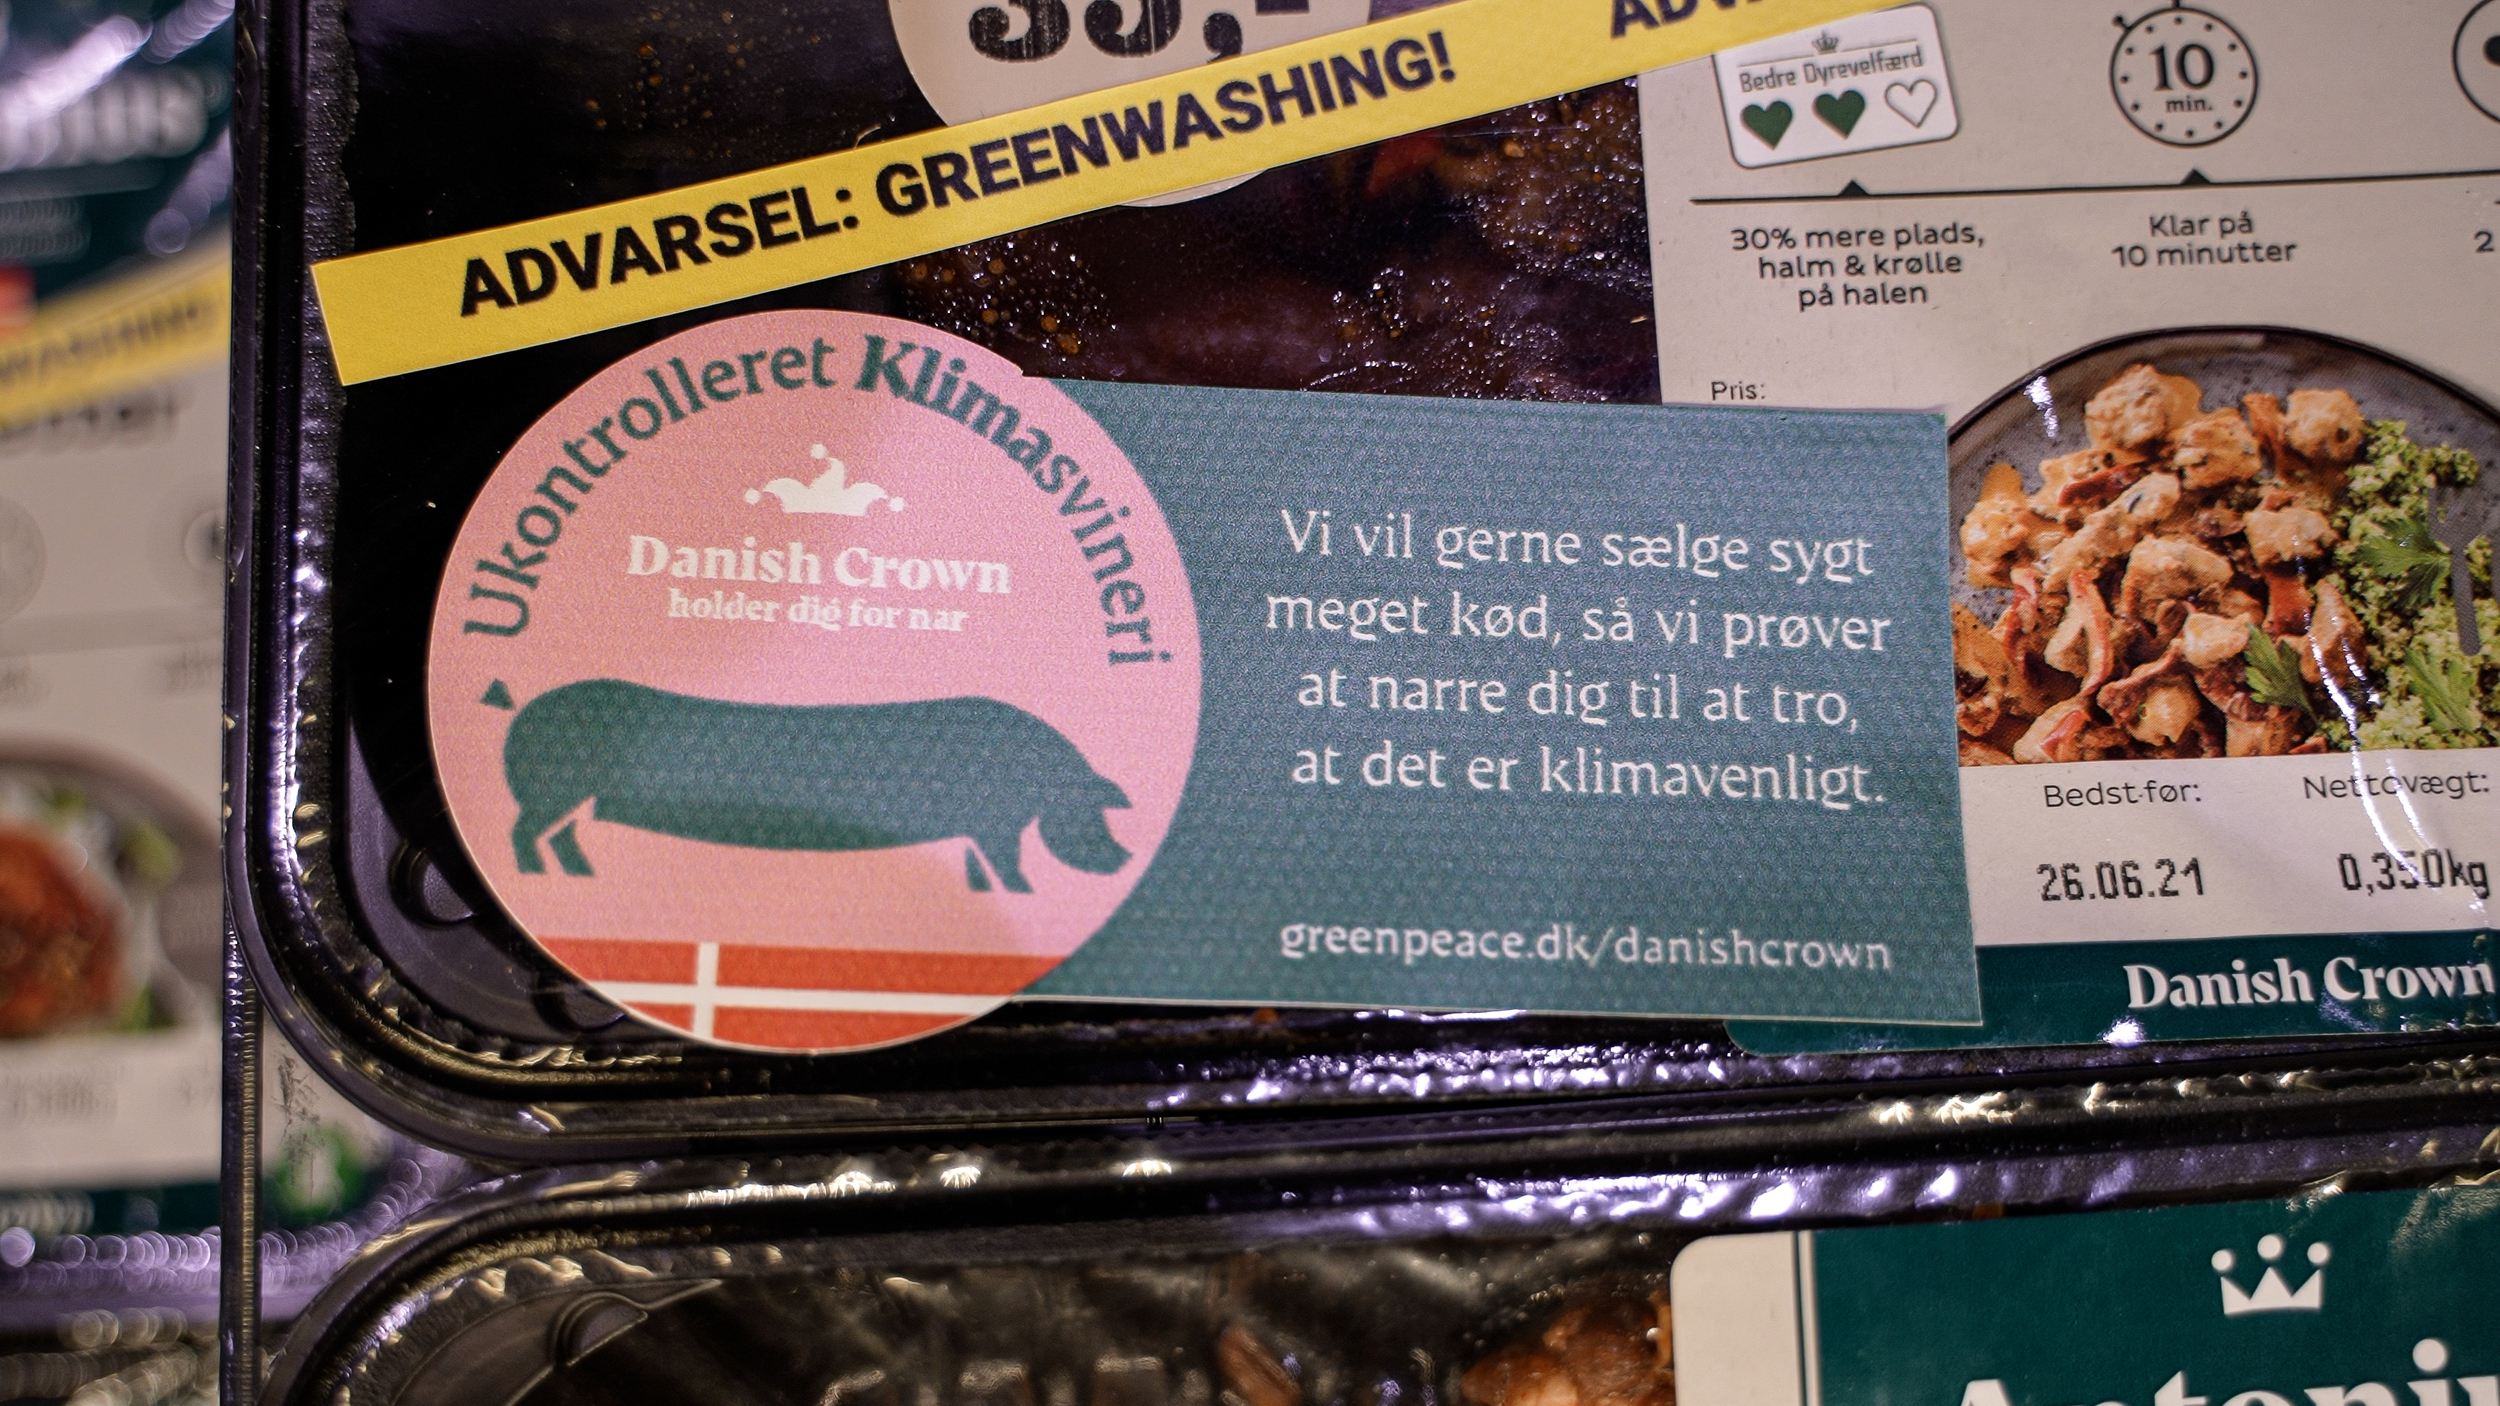 Supermarket Labelling Activity Exposes Meat ‘Greenwashing’ in Denmark